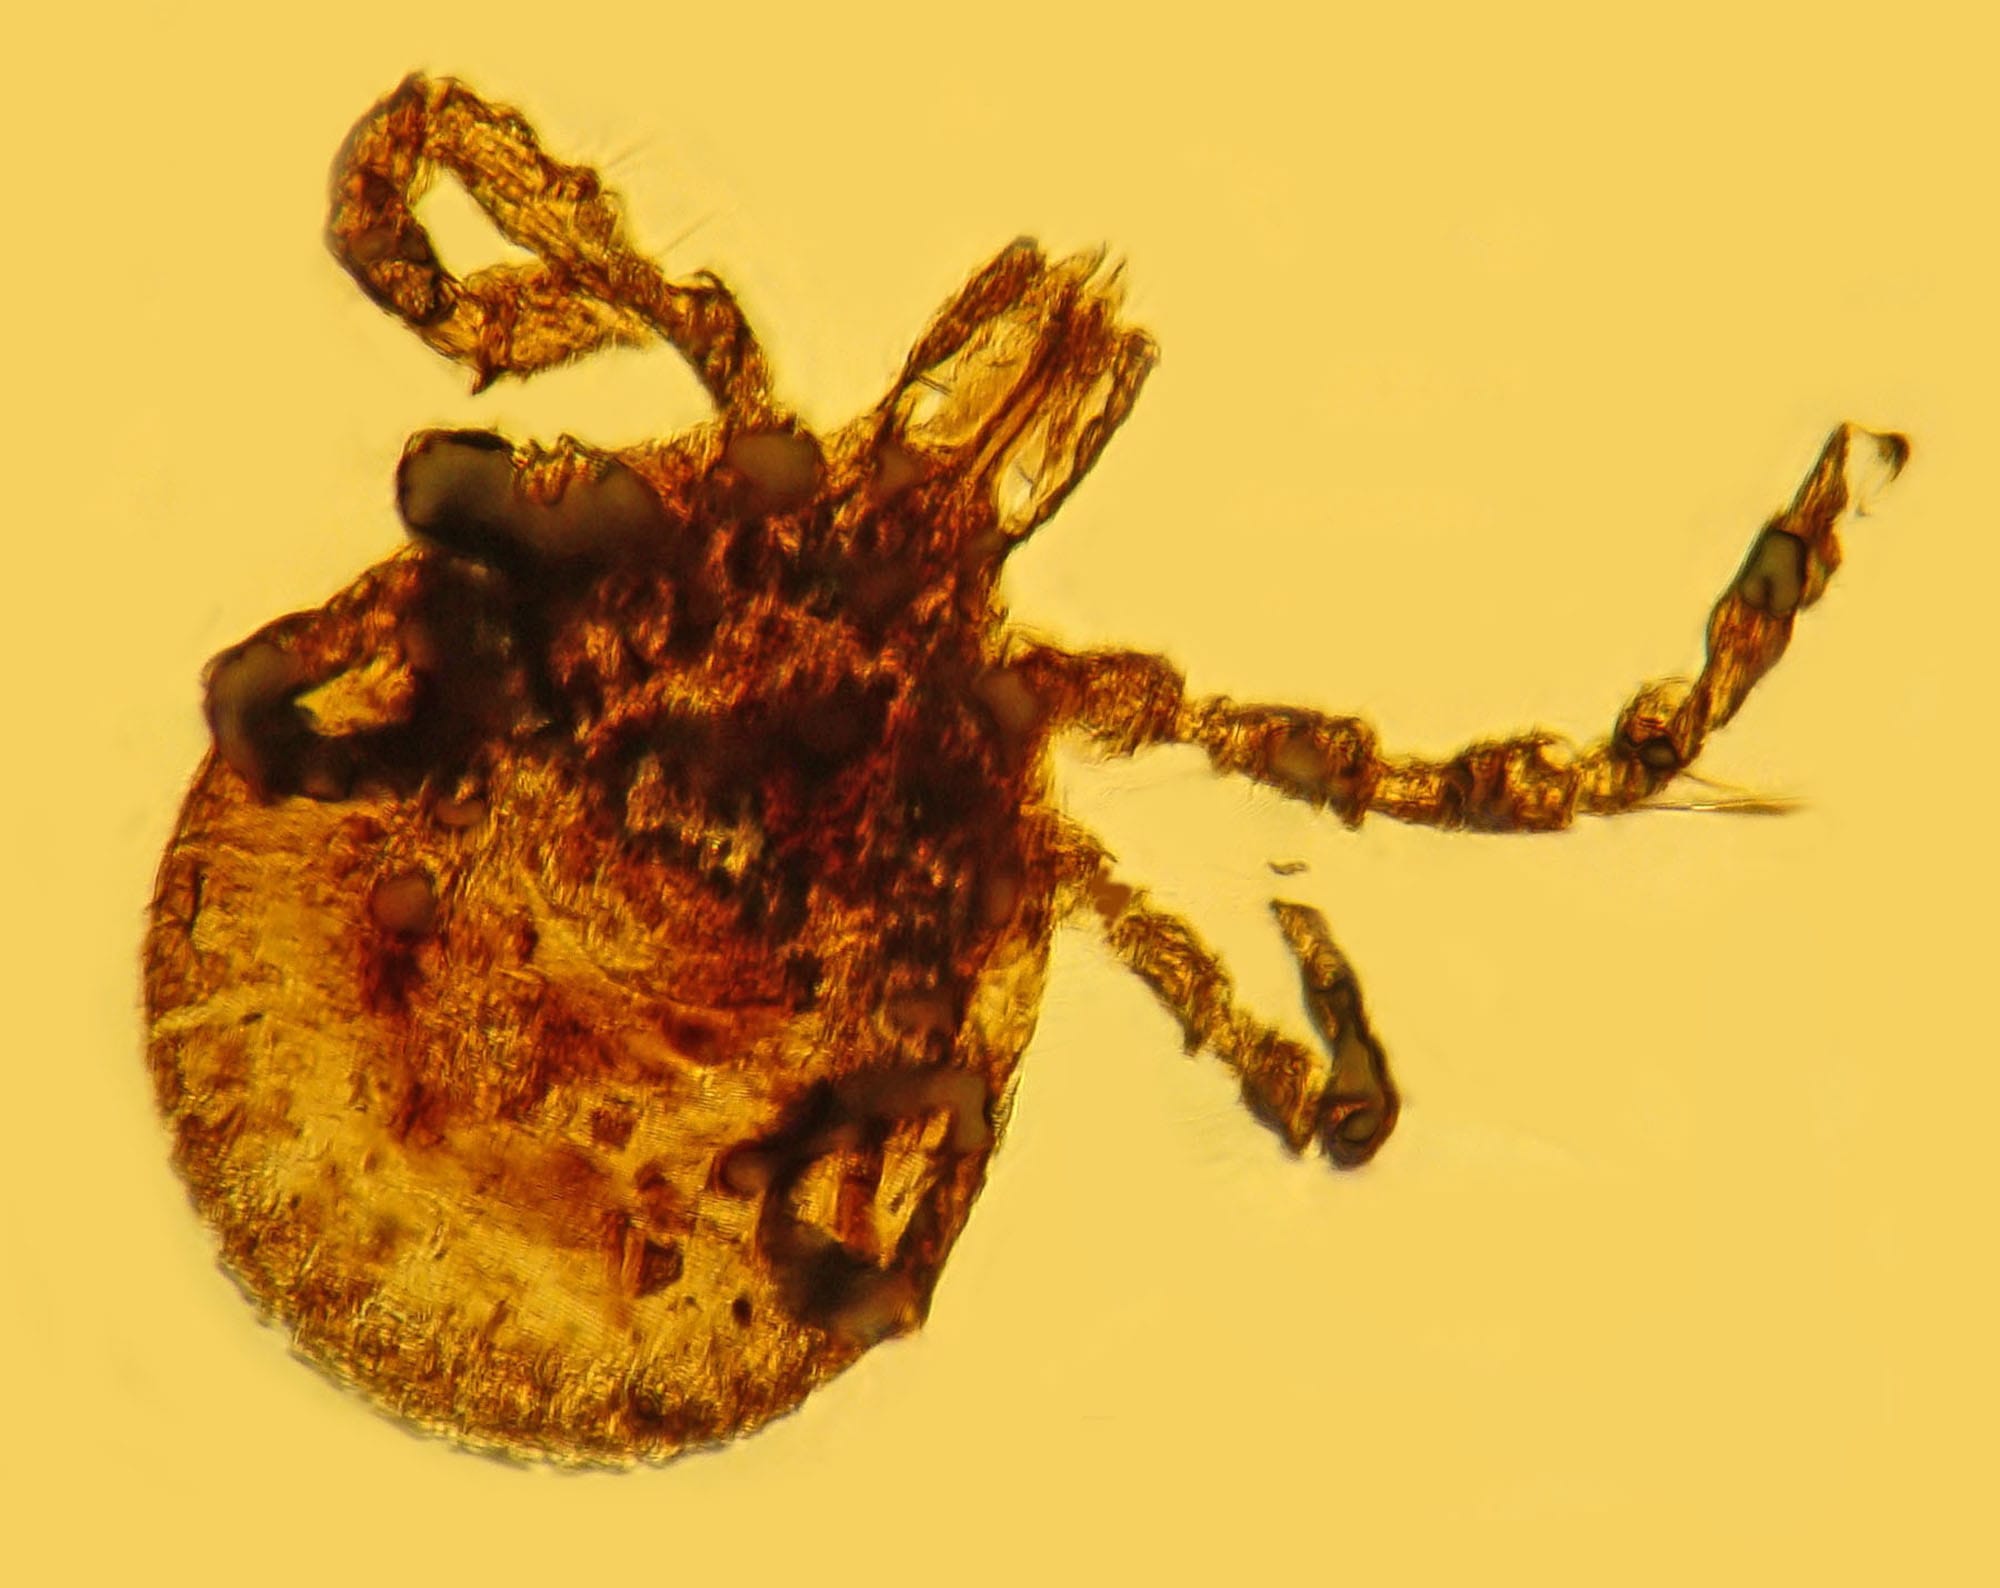 Oregon State University
An ancient fossilized tick contains bacteria similar to the ones that cause Lyme disease. Findings by George Poinar Jr. published in the journal Historical Biology in April indicate that the tick-borne disease probably existed long before there were people to get it.